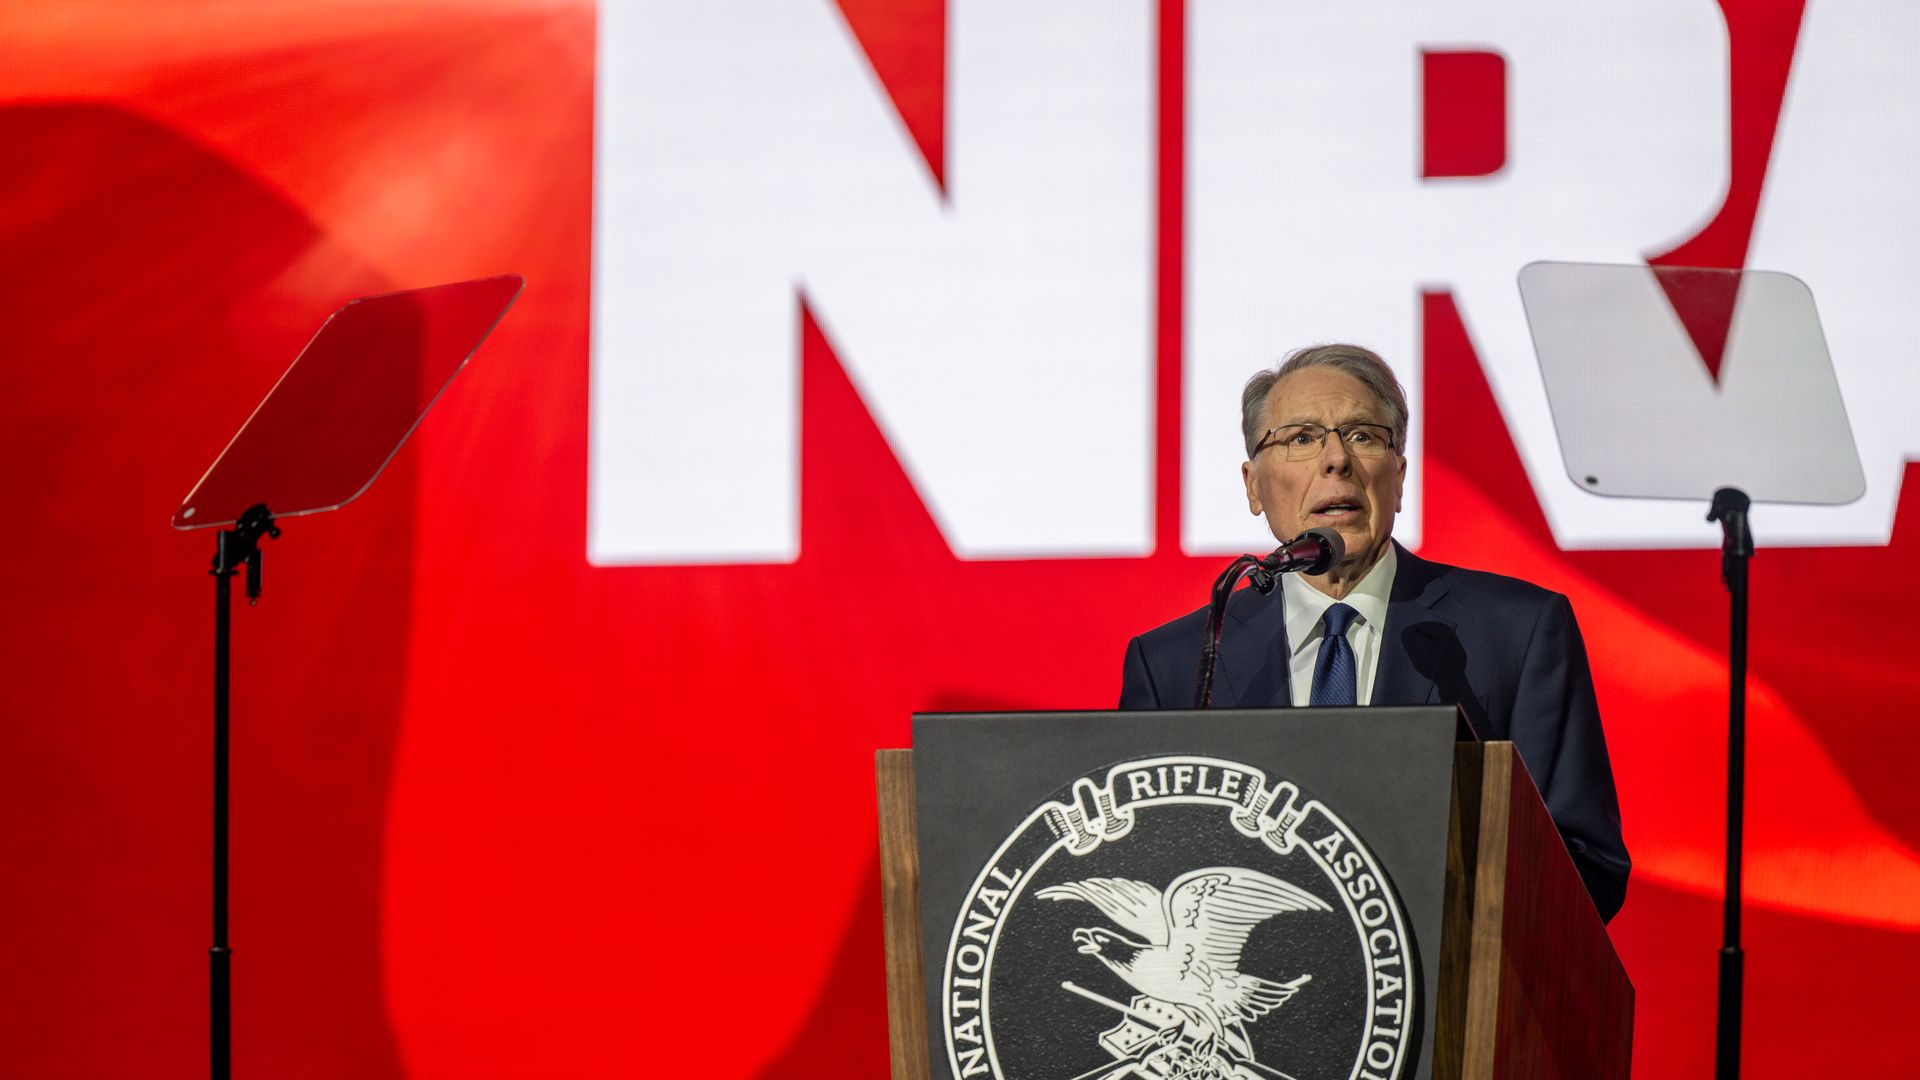 NRA CEO Wayne LaPierre speaks at the organization's annual convention.